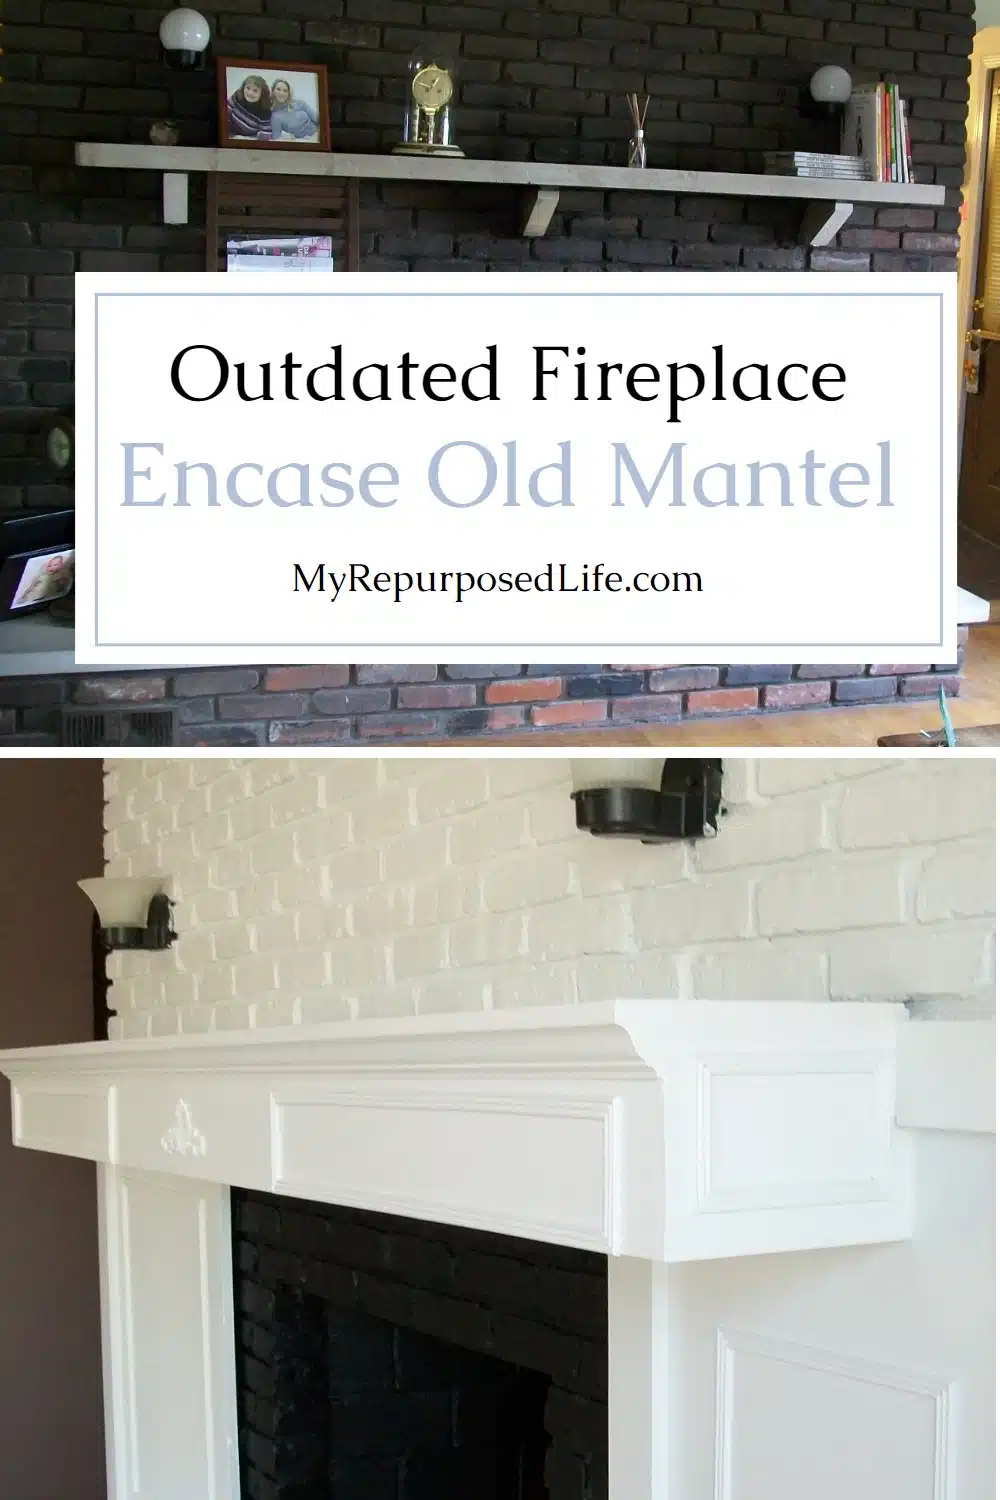 How to update an old, outdated fireplace by encasing the mantel with plywood and molding. Add paint, change up the look of the entire room. #MyRepurposedLife #reno #fireplace via @repurposedlife